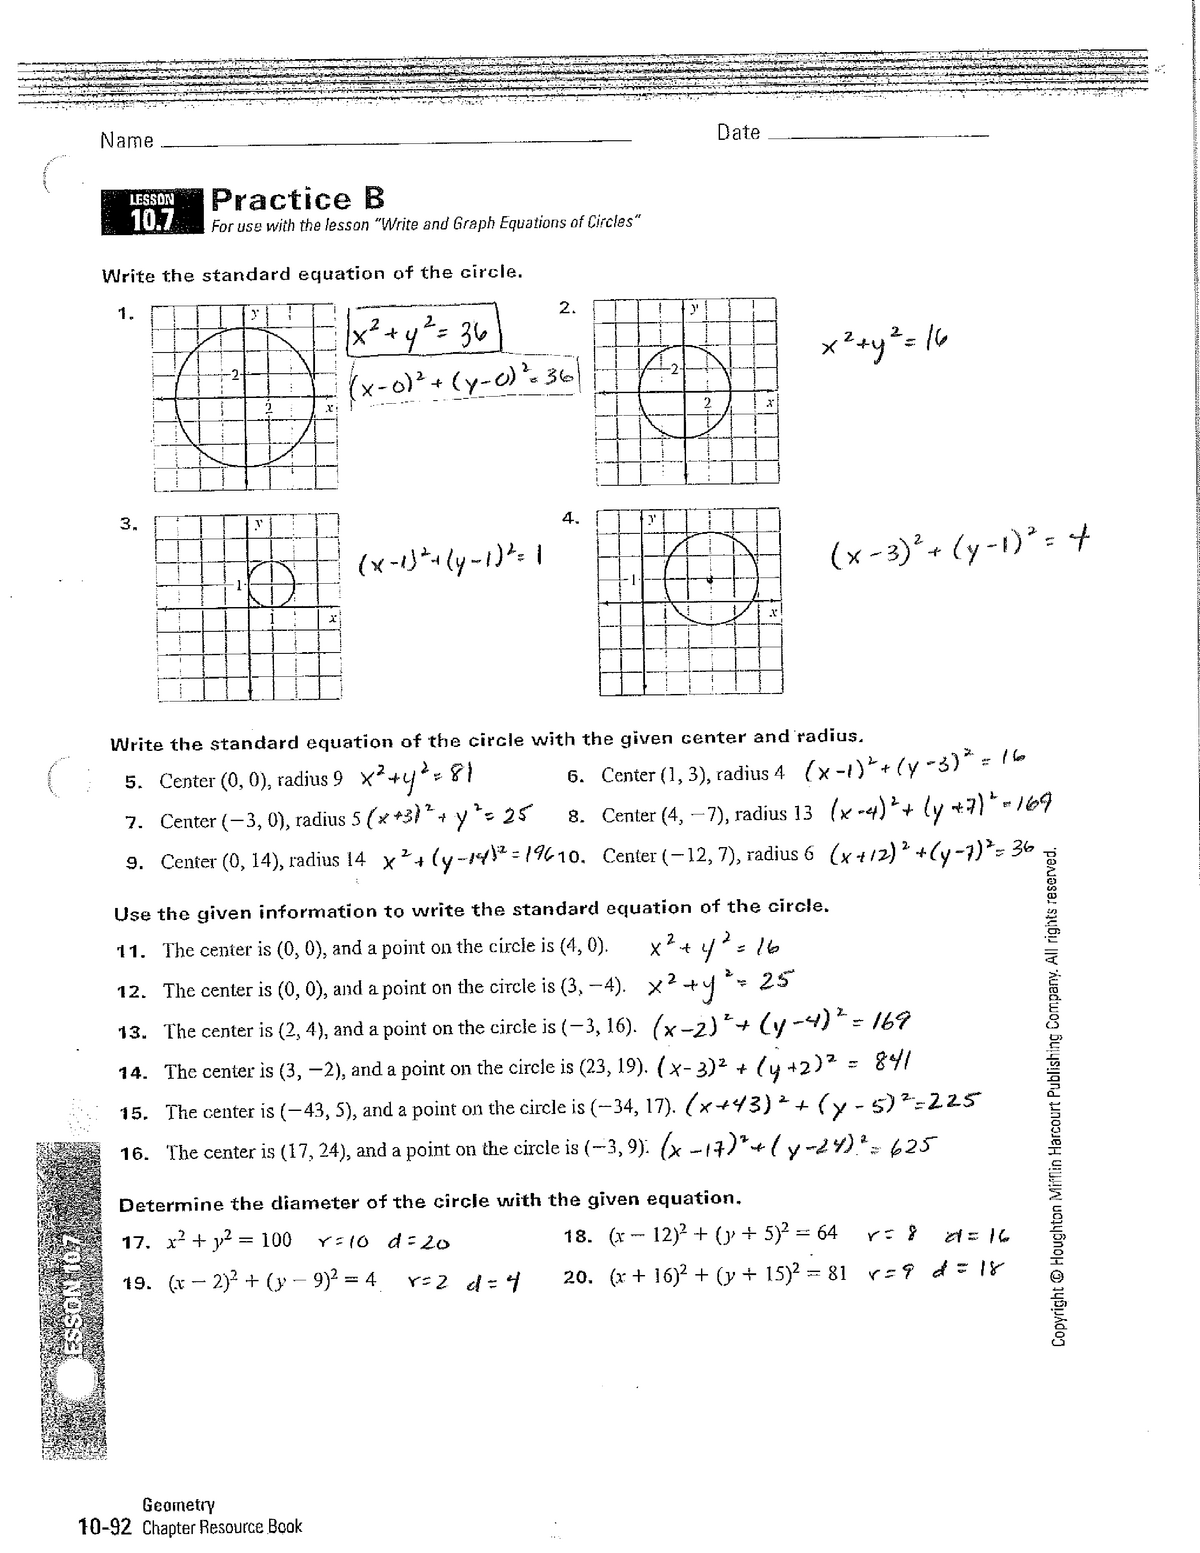 lesson 10.7 practice a geometry answers